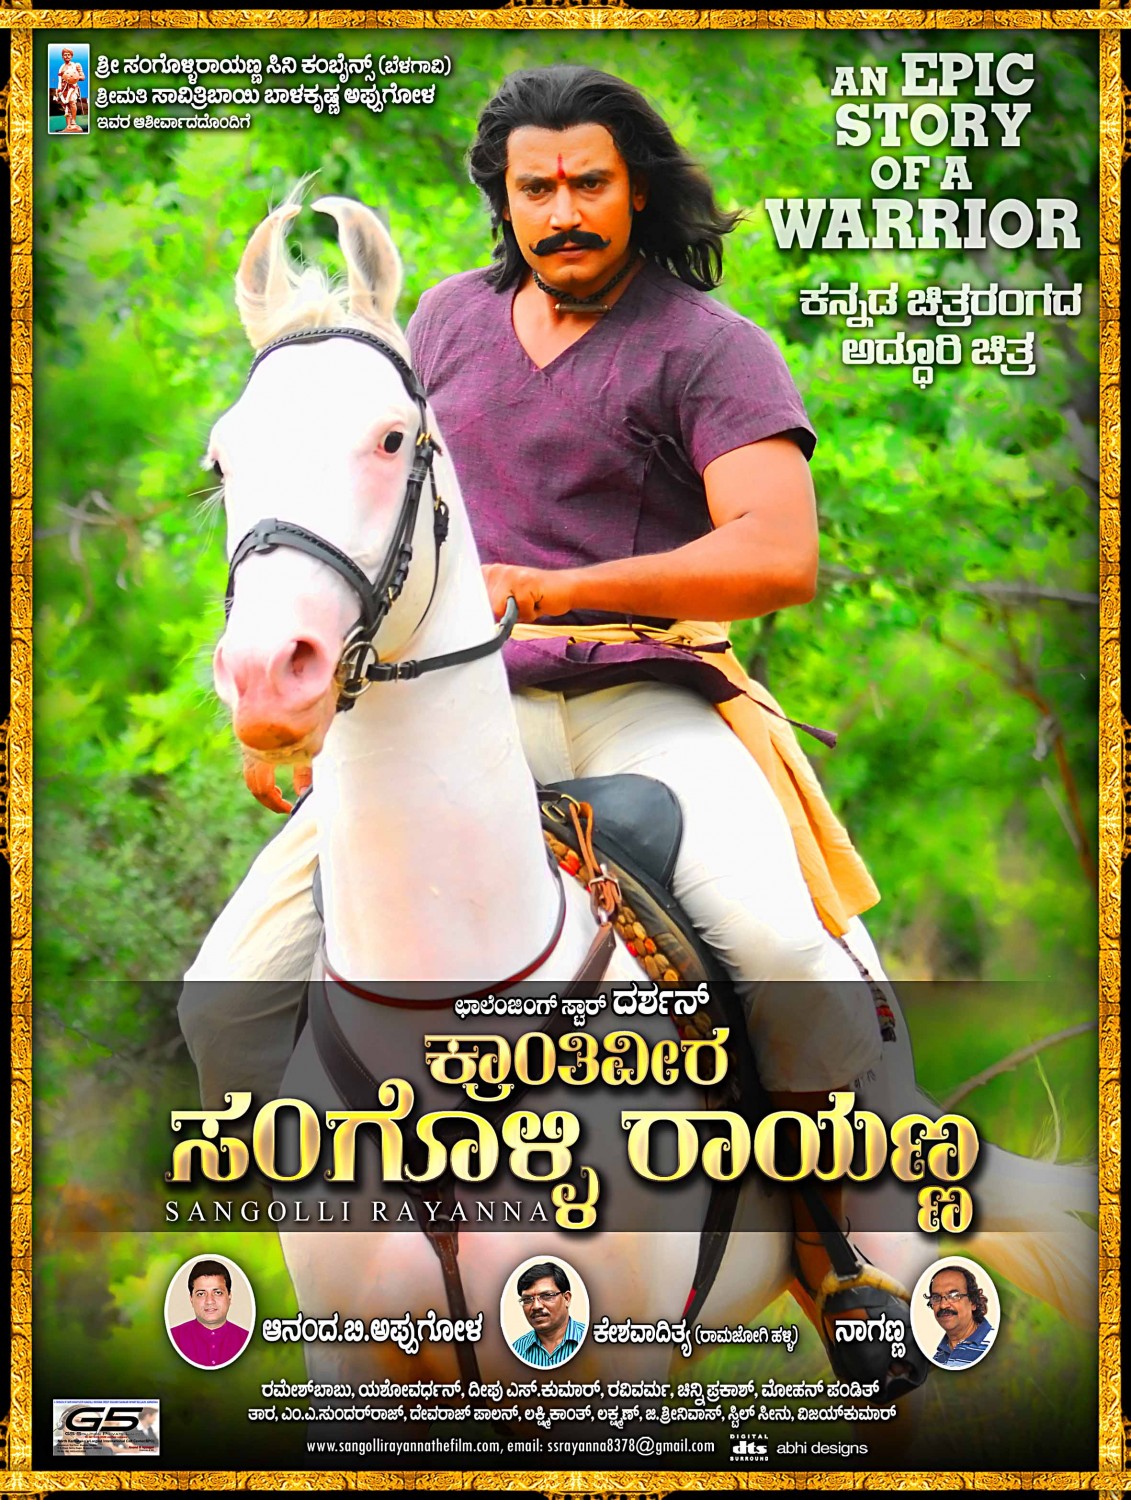 Extra Large Movie Poster Image for Sangolli Rayanna (#15 of 79)